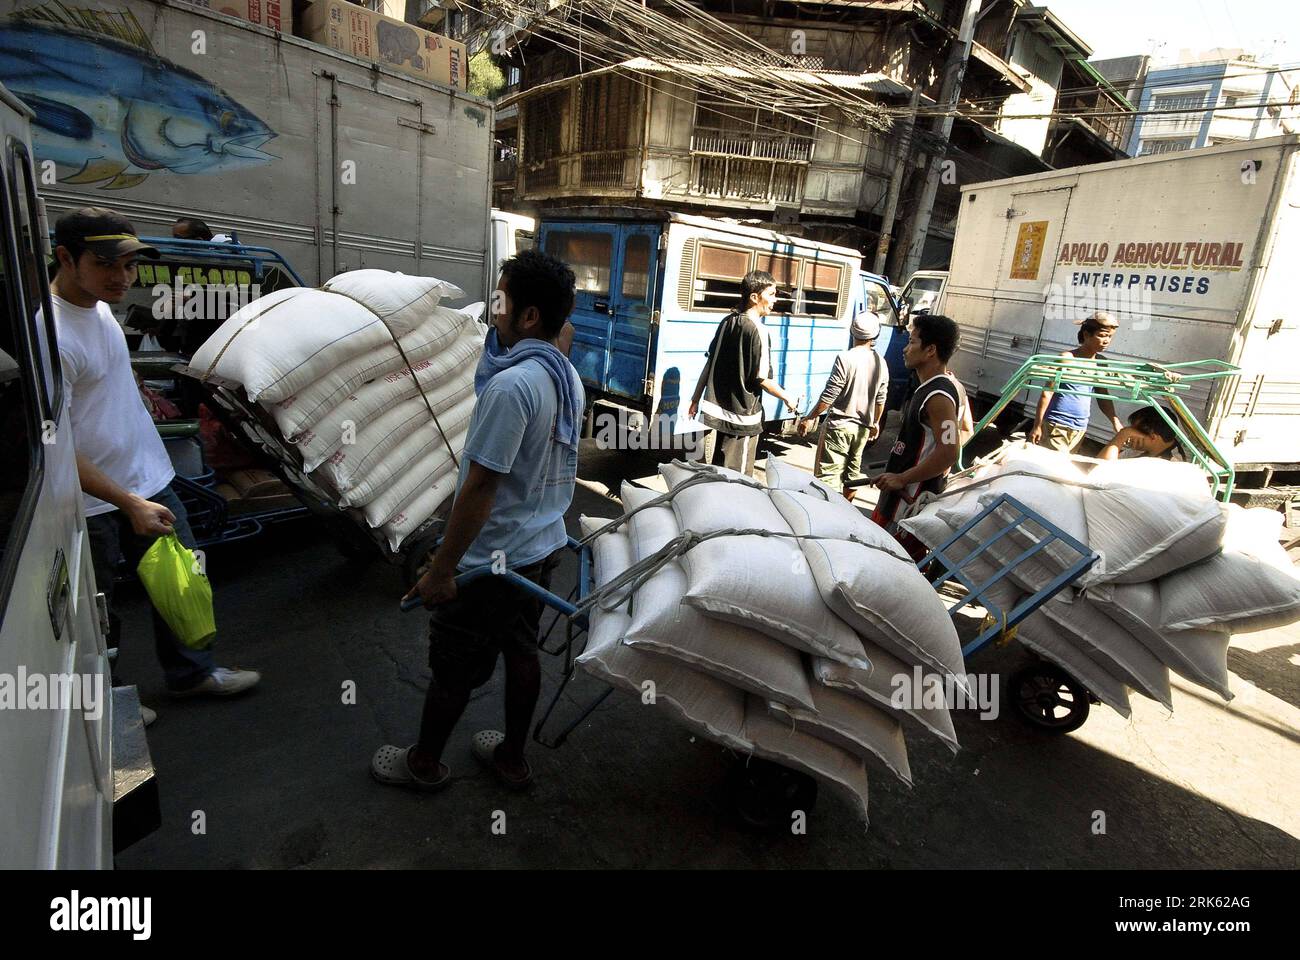 Bildnummer: 53783970  Datum: 08.02.2010  Copyright: imago/Xinhua (100208) -- MANILA, Feb. 8, 2010 (Xinhua) -- Local traders at the busy streets of Divisoria load sacks of flour and sugar ready for distribution for local retailer in Manila, capital of the Philippines, Feb. 8, 2010. Sugar supply shortfall resulted to higher price at local markets as local sugar millers preferred to export their output for higher profit margins, and local bakers now threatens a price increase as well. (Xinhua/Jon Fabrigar) (6)PHILIPINES-SUGAR-HIKE PUBLICATIONxNOTxINxCHN Philippinen Wirtschaft Zucker Zuckerpreis P Stock Photo